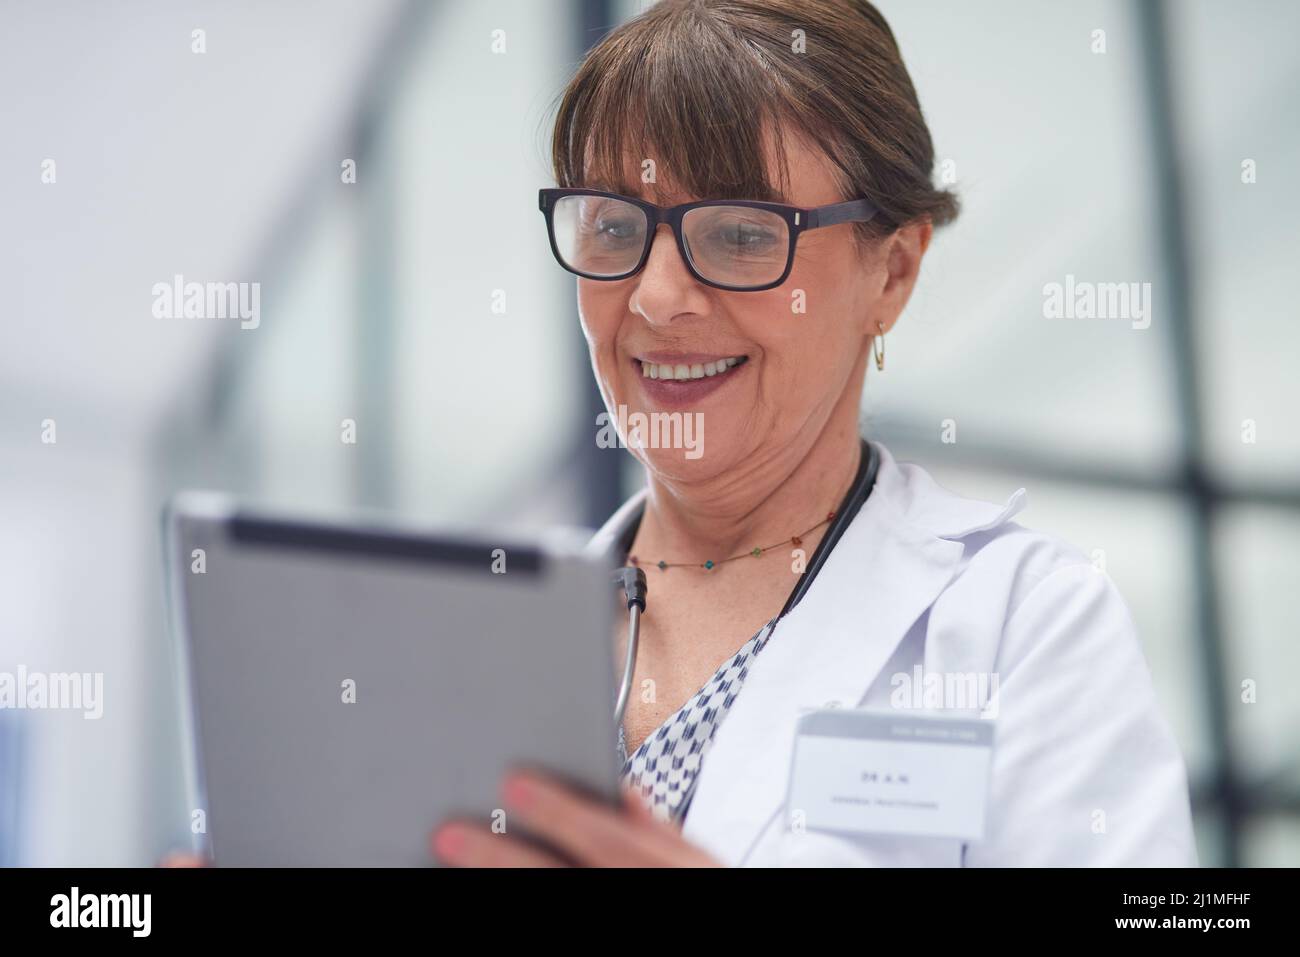 Live appointments have been a brilliant work around. Shot of a mature female doctor using a tablet. Stock Photo